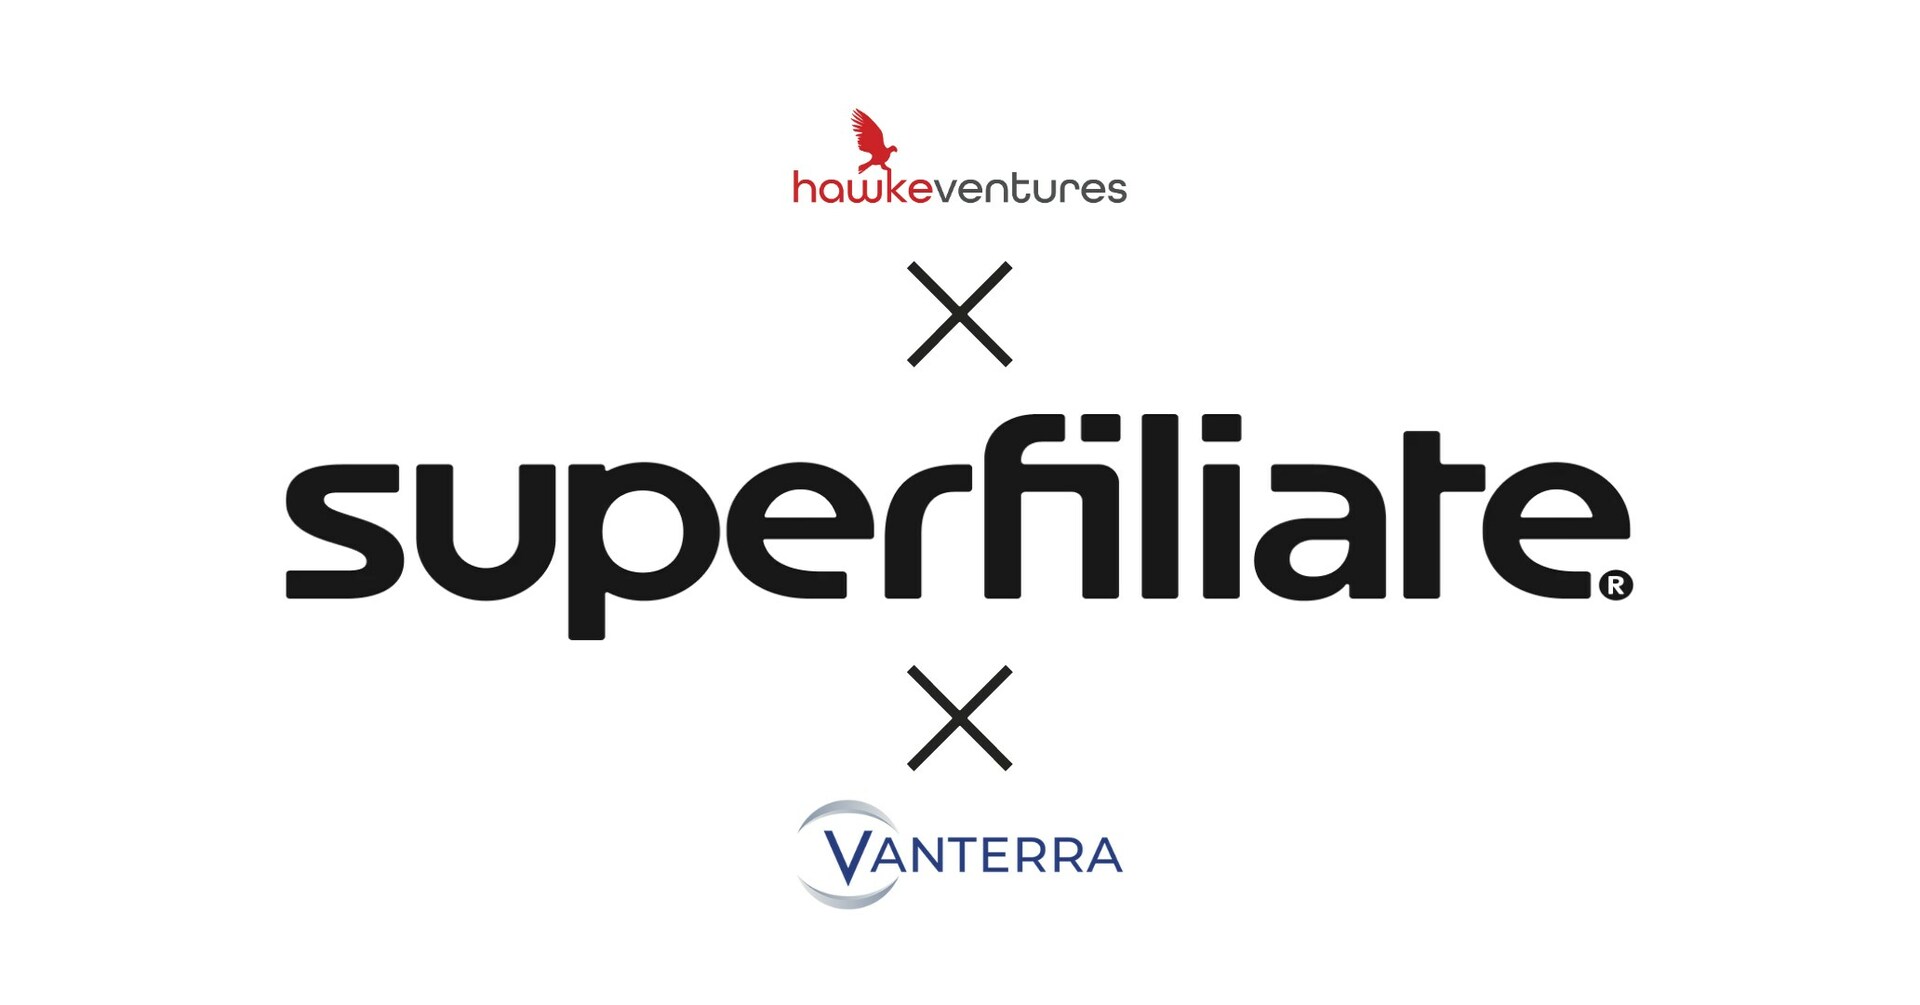 Superfiliate Raises $3M Seed Round to Transform Affiliate Links and Discount Codes into Personalized Shopping Experiences